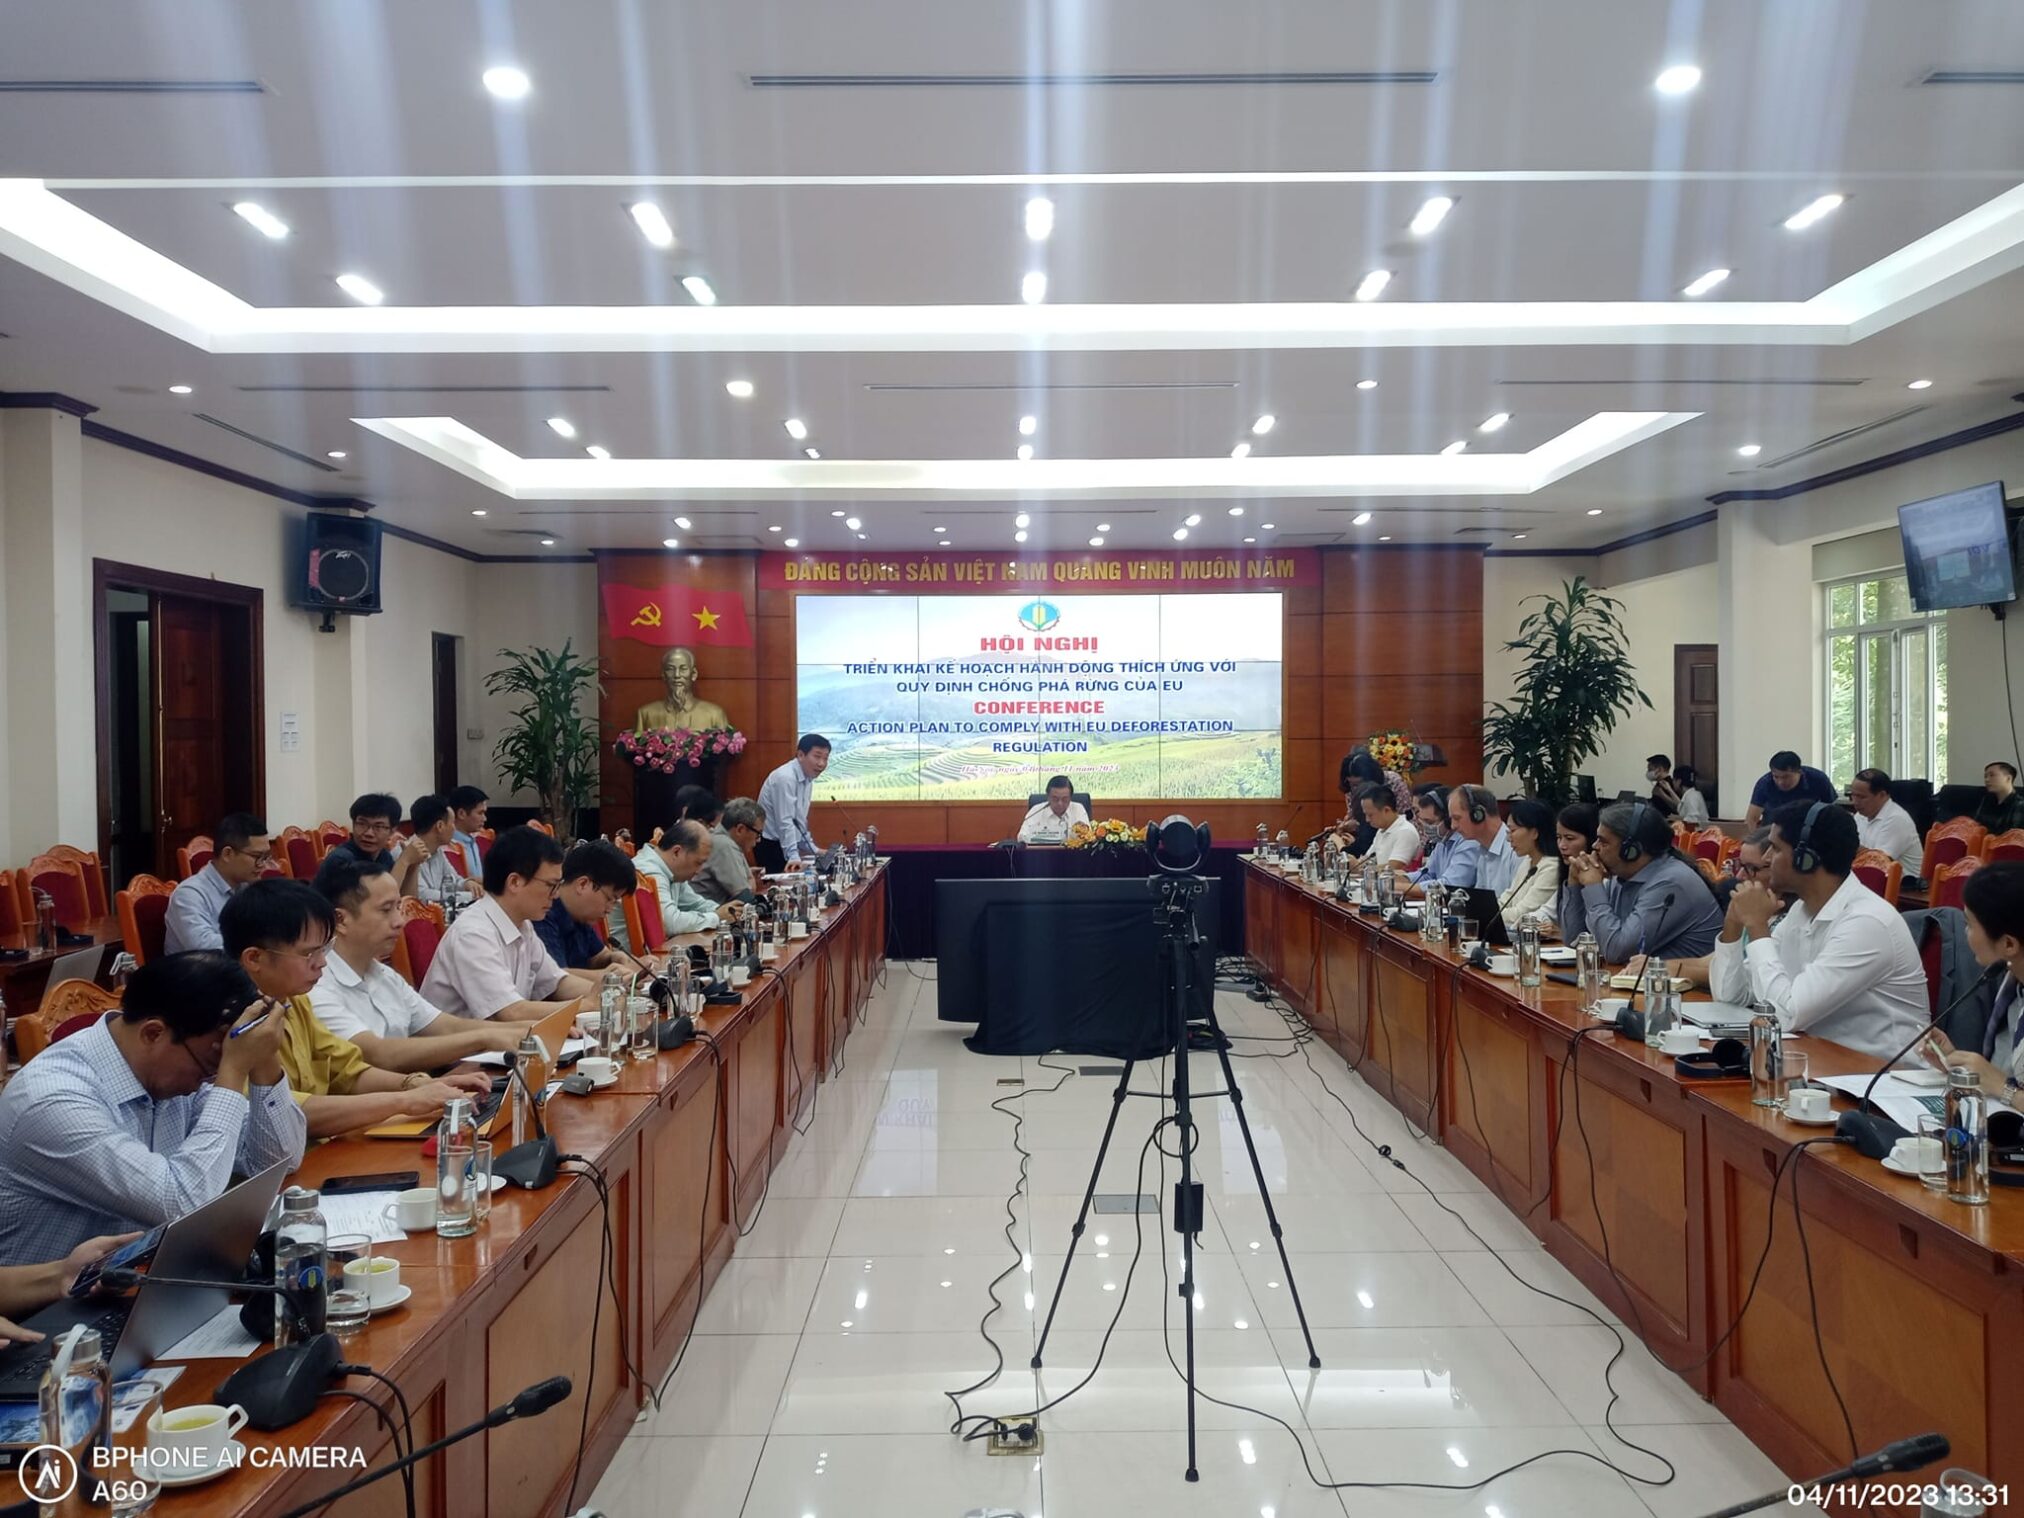 Conference on implementing action plans to adapt to EU Deforestation-free Regulations at the Ministry of Agriculture and Rural Development on November 4 afternoon.